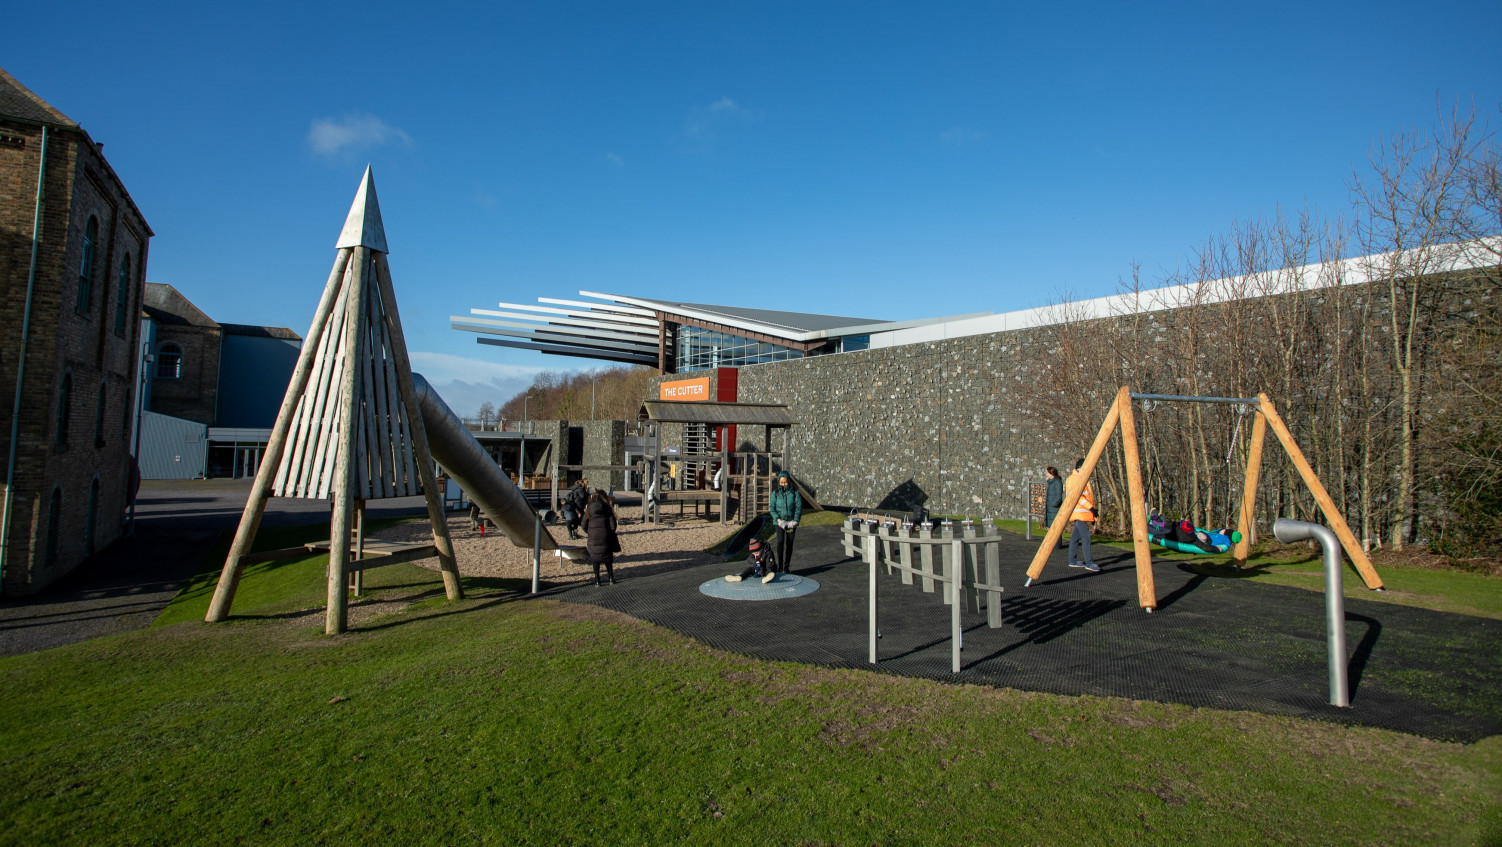 Overview of Woodhorn Museum play area